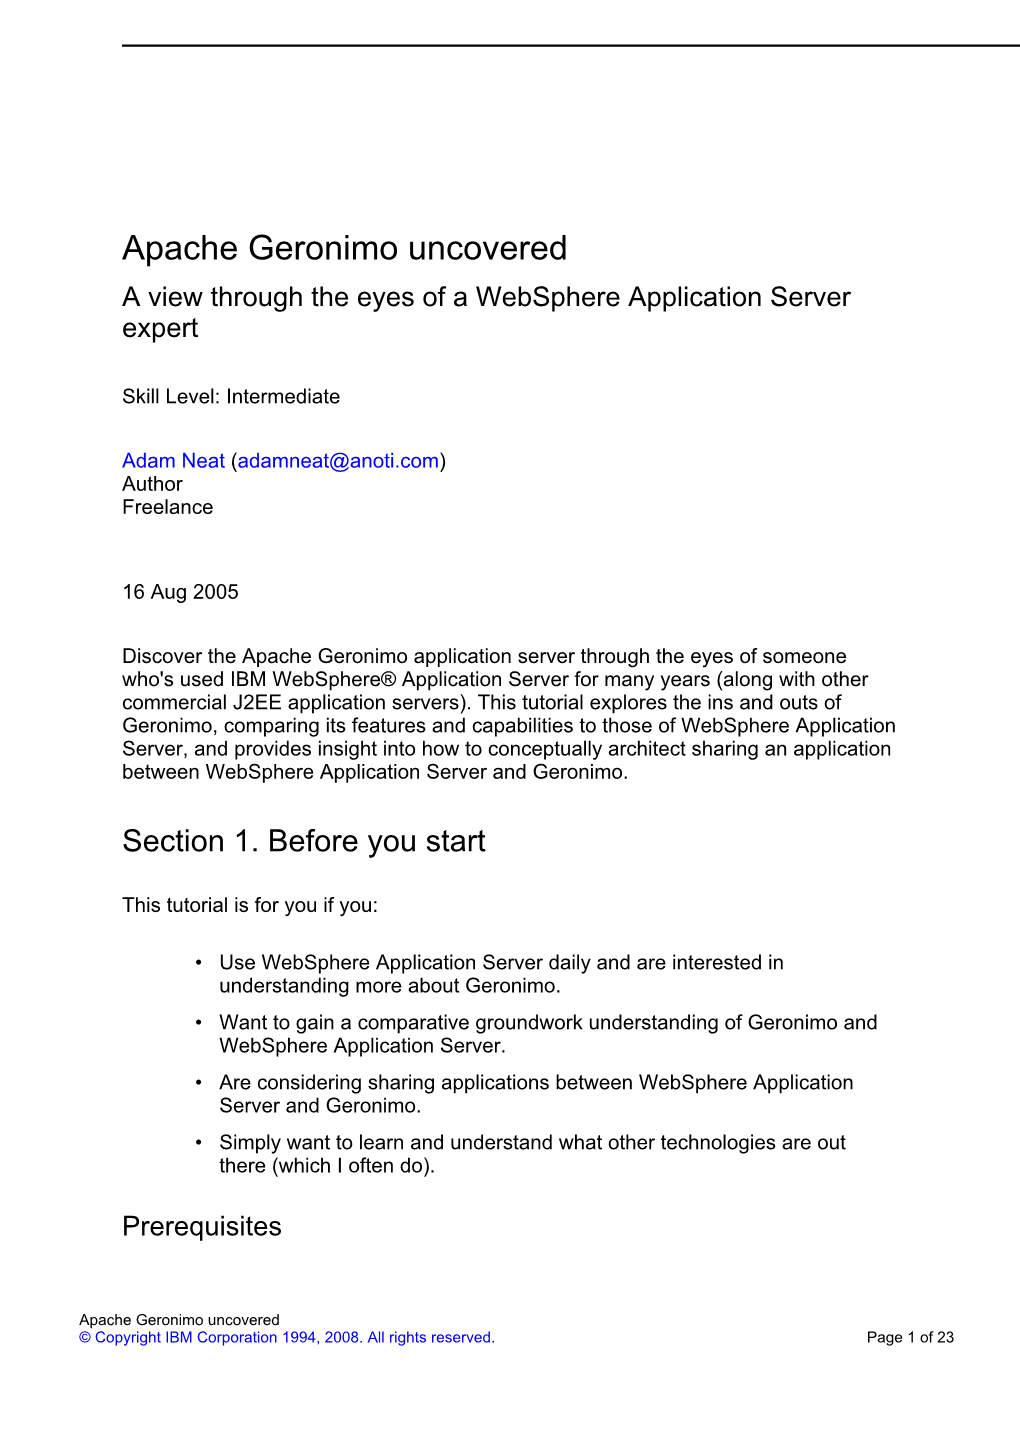 Apache Geronimo Uncovered a View Through the Eyes of a Websphere Application Server Expert